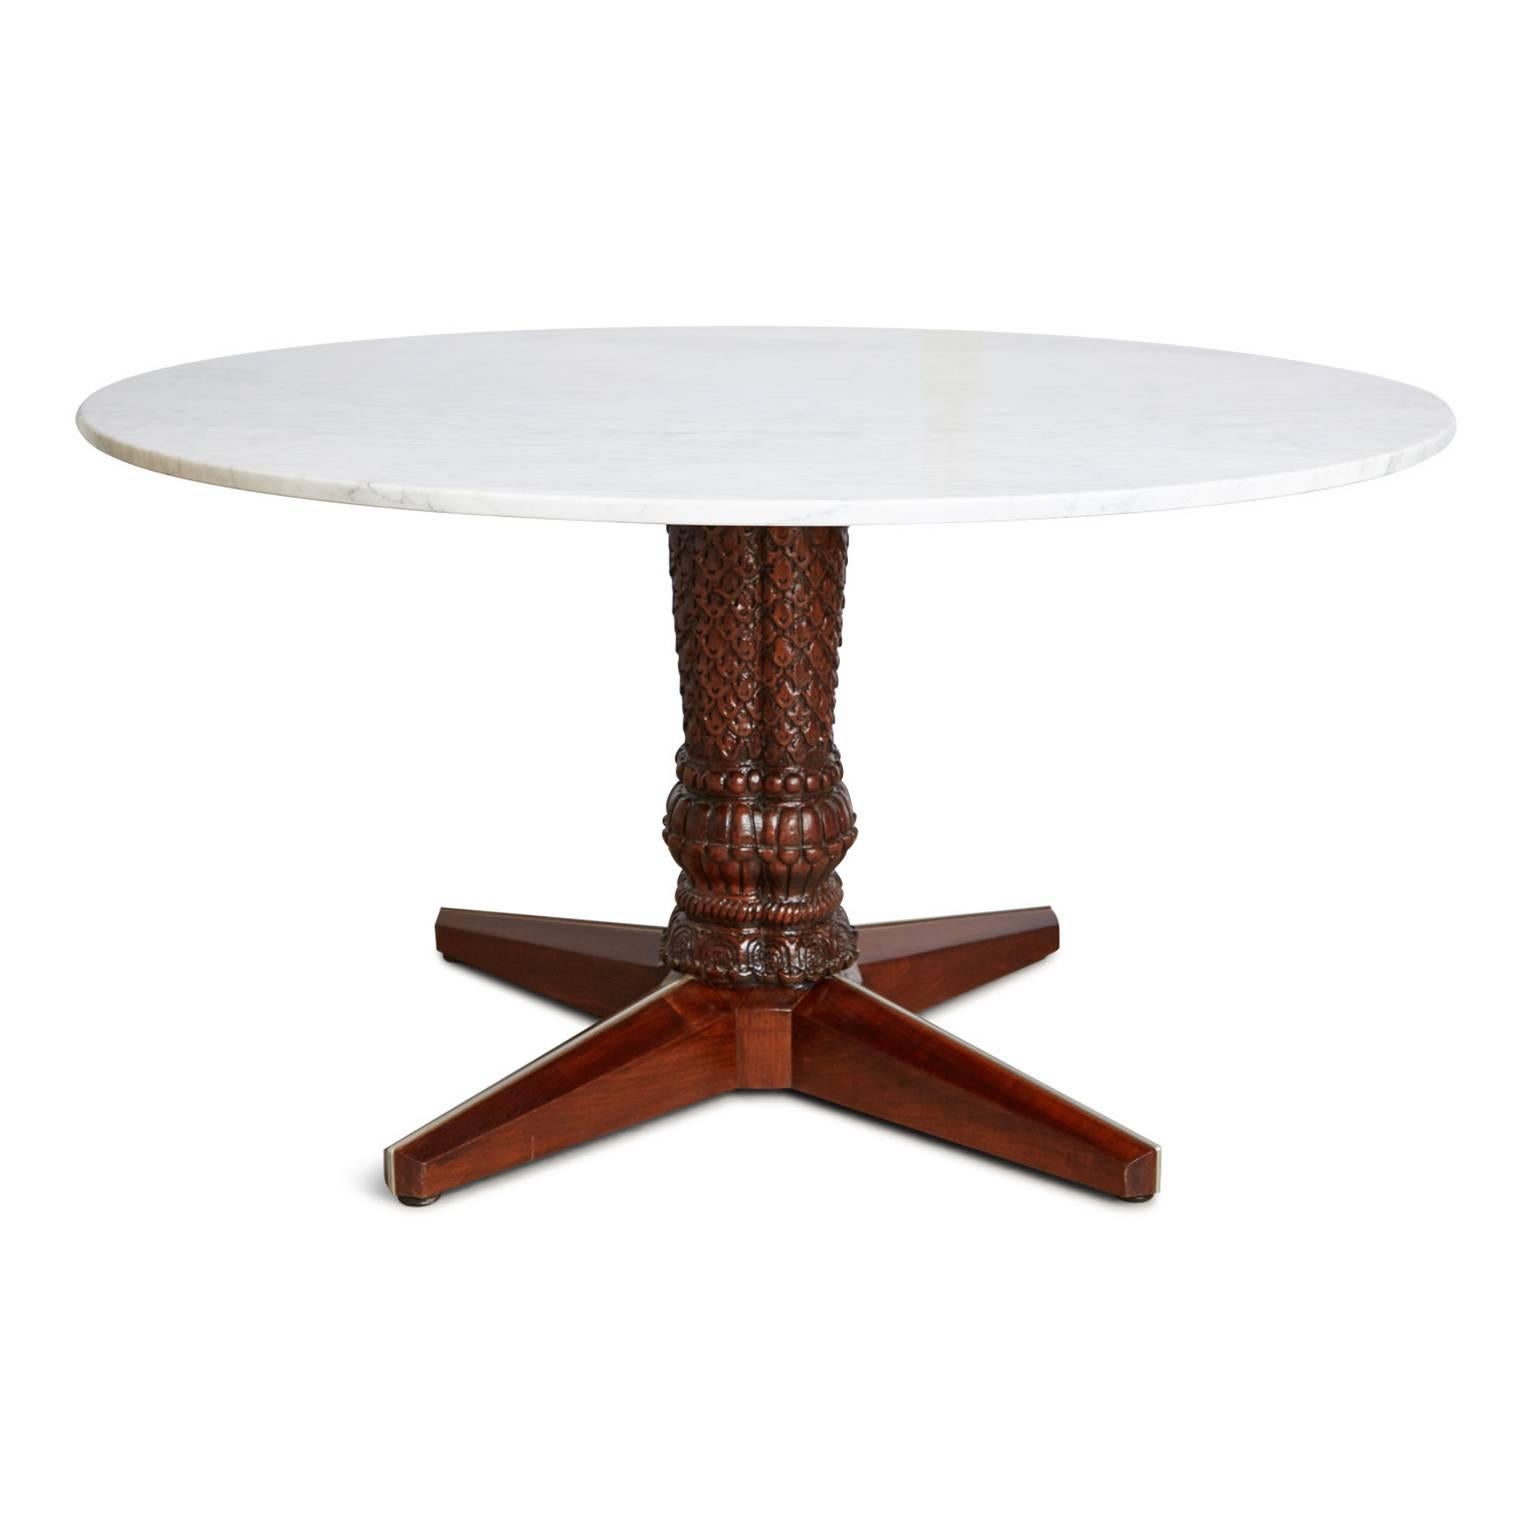 This game table by Maurice Bailey for Monteverdi-Young features an exquisite hand-carved solid walnut base, which has been newly refinished in a high gloss lacquer and topped with a beautiful carrara marble surface. Monteverdi-Young was renowned for